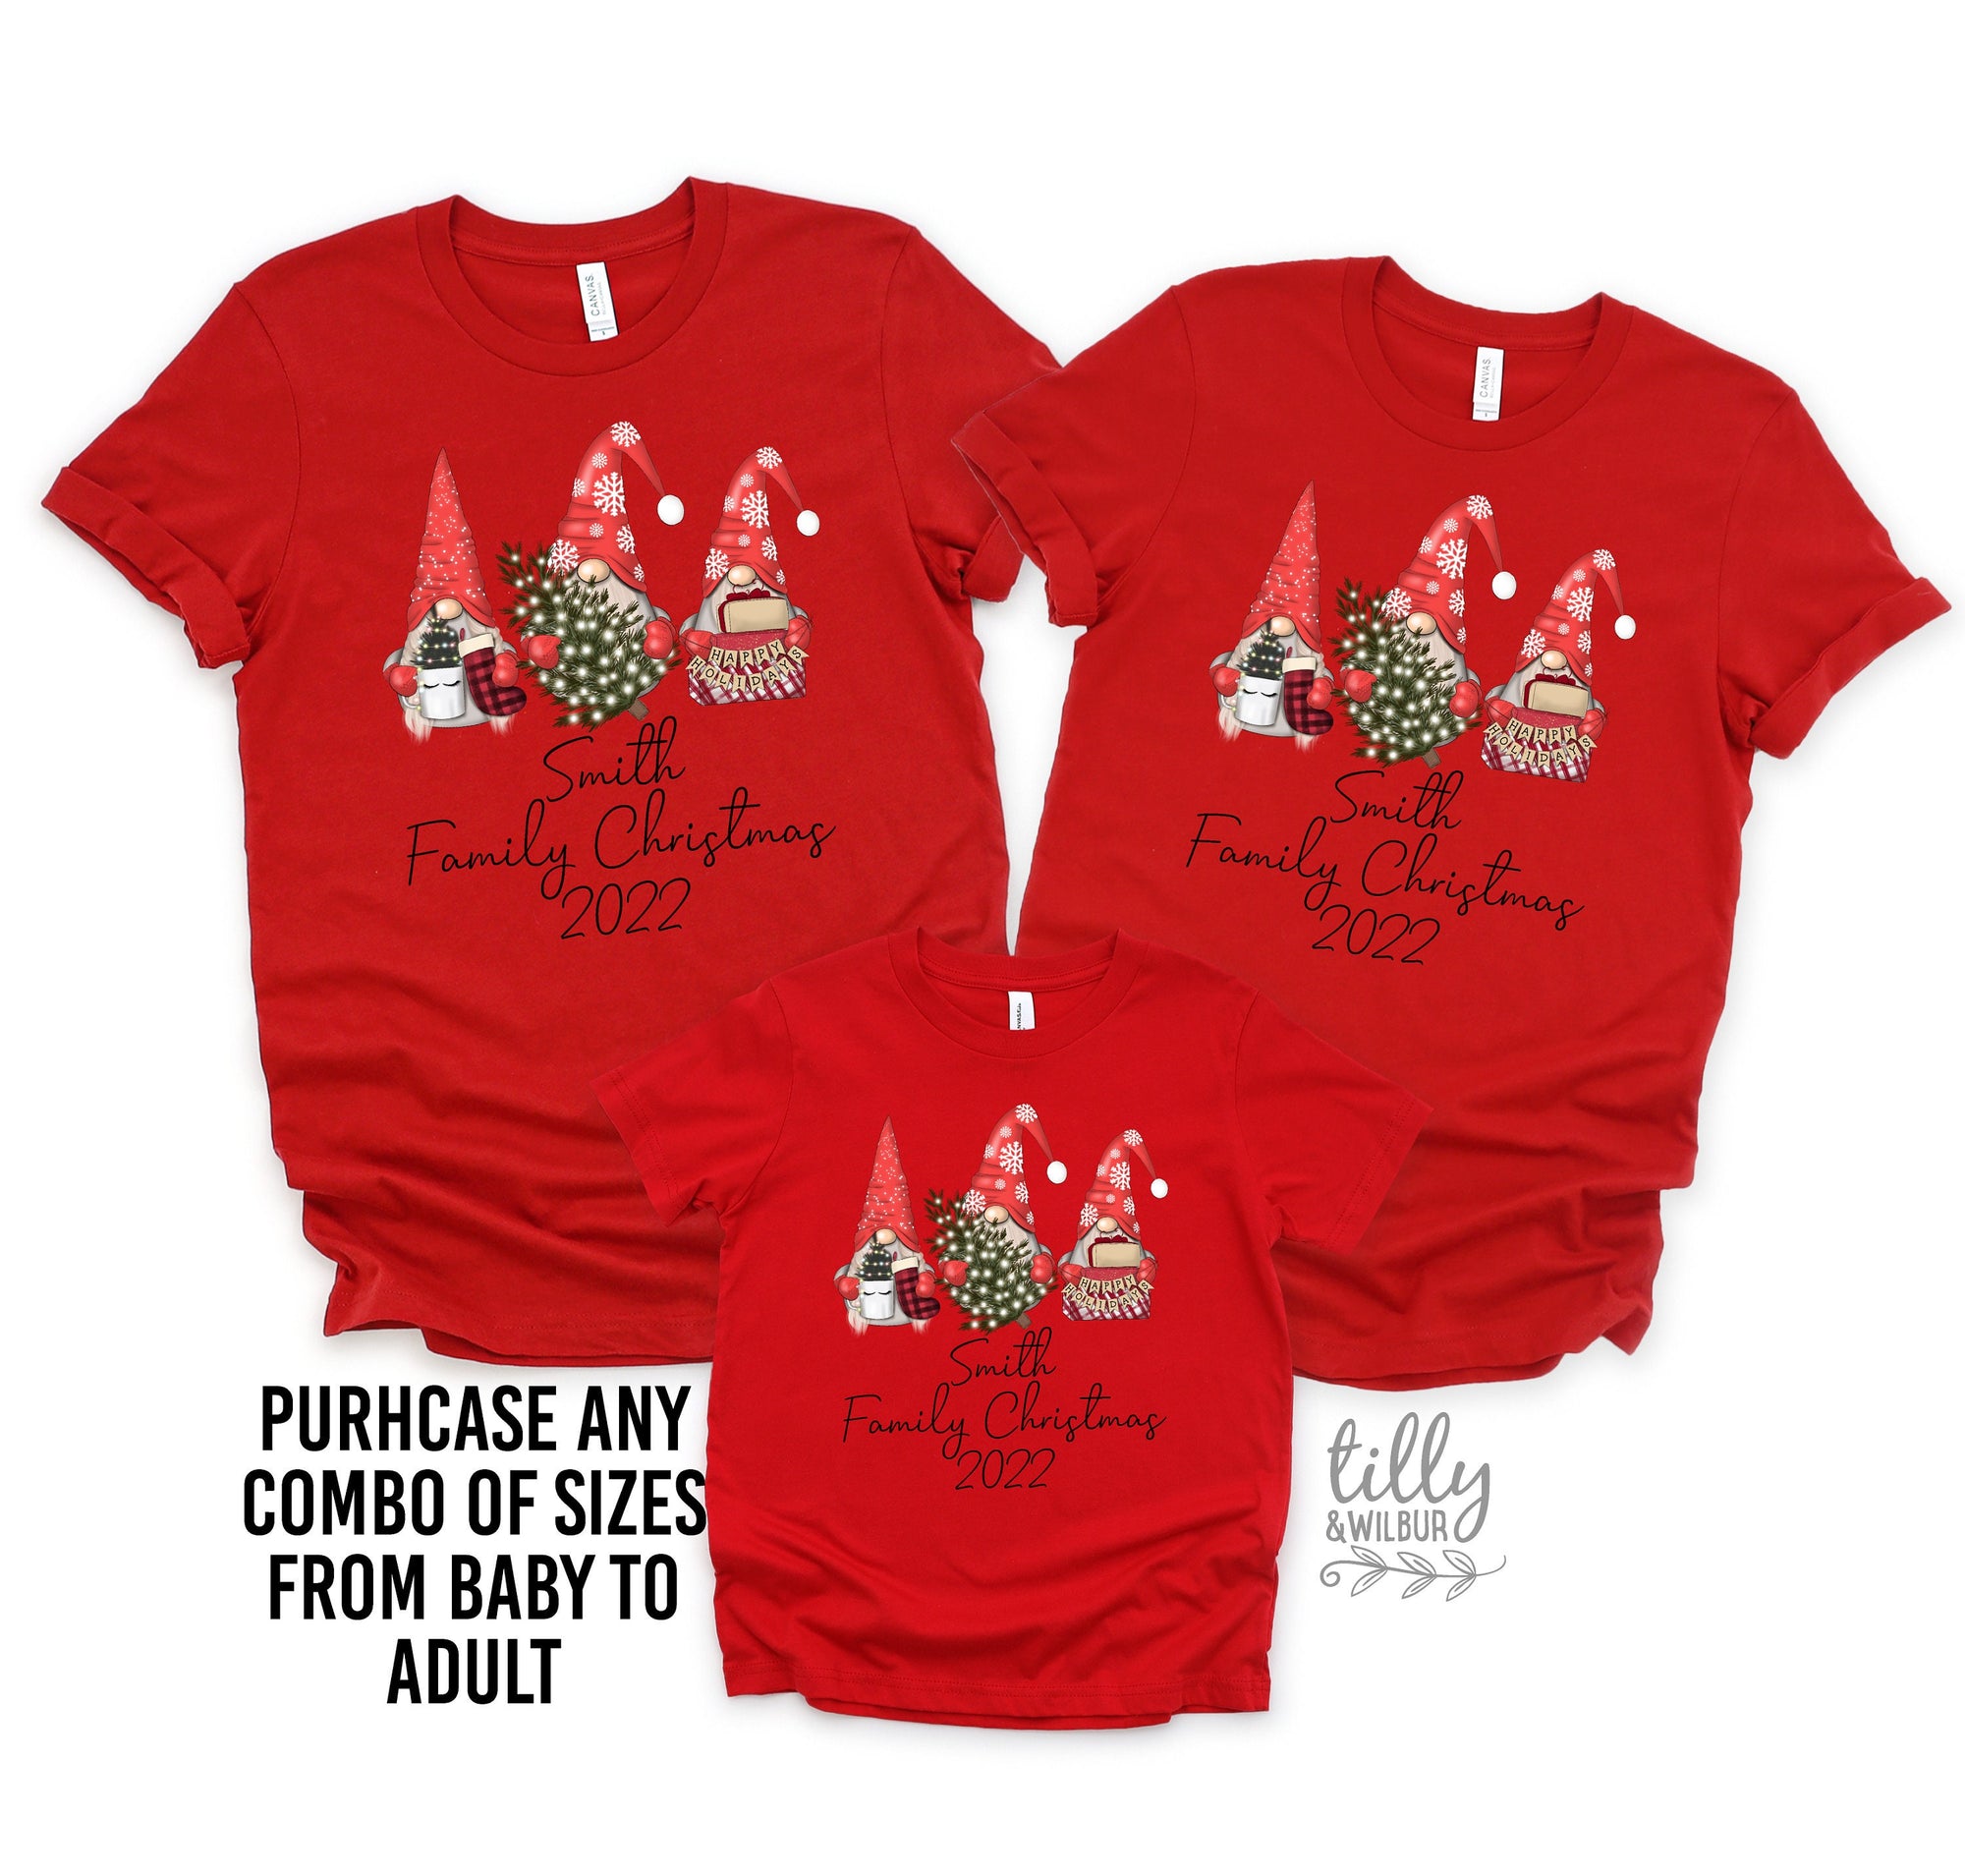 Personalised Family Christmas Matching T-Shirts, Matching Christmas Shirts, Matching Gnome Santa T-Shirts, Matching Christmas Family Shirts